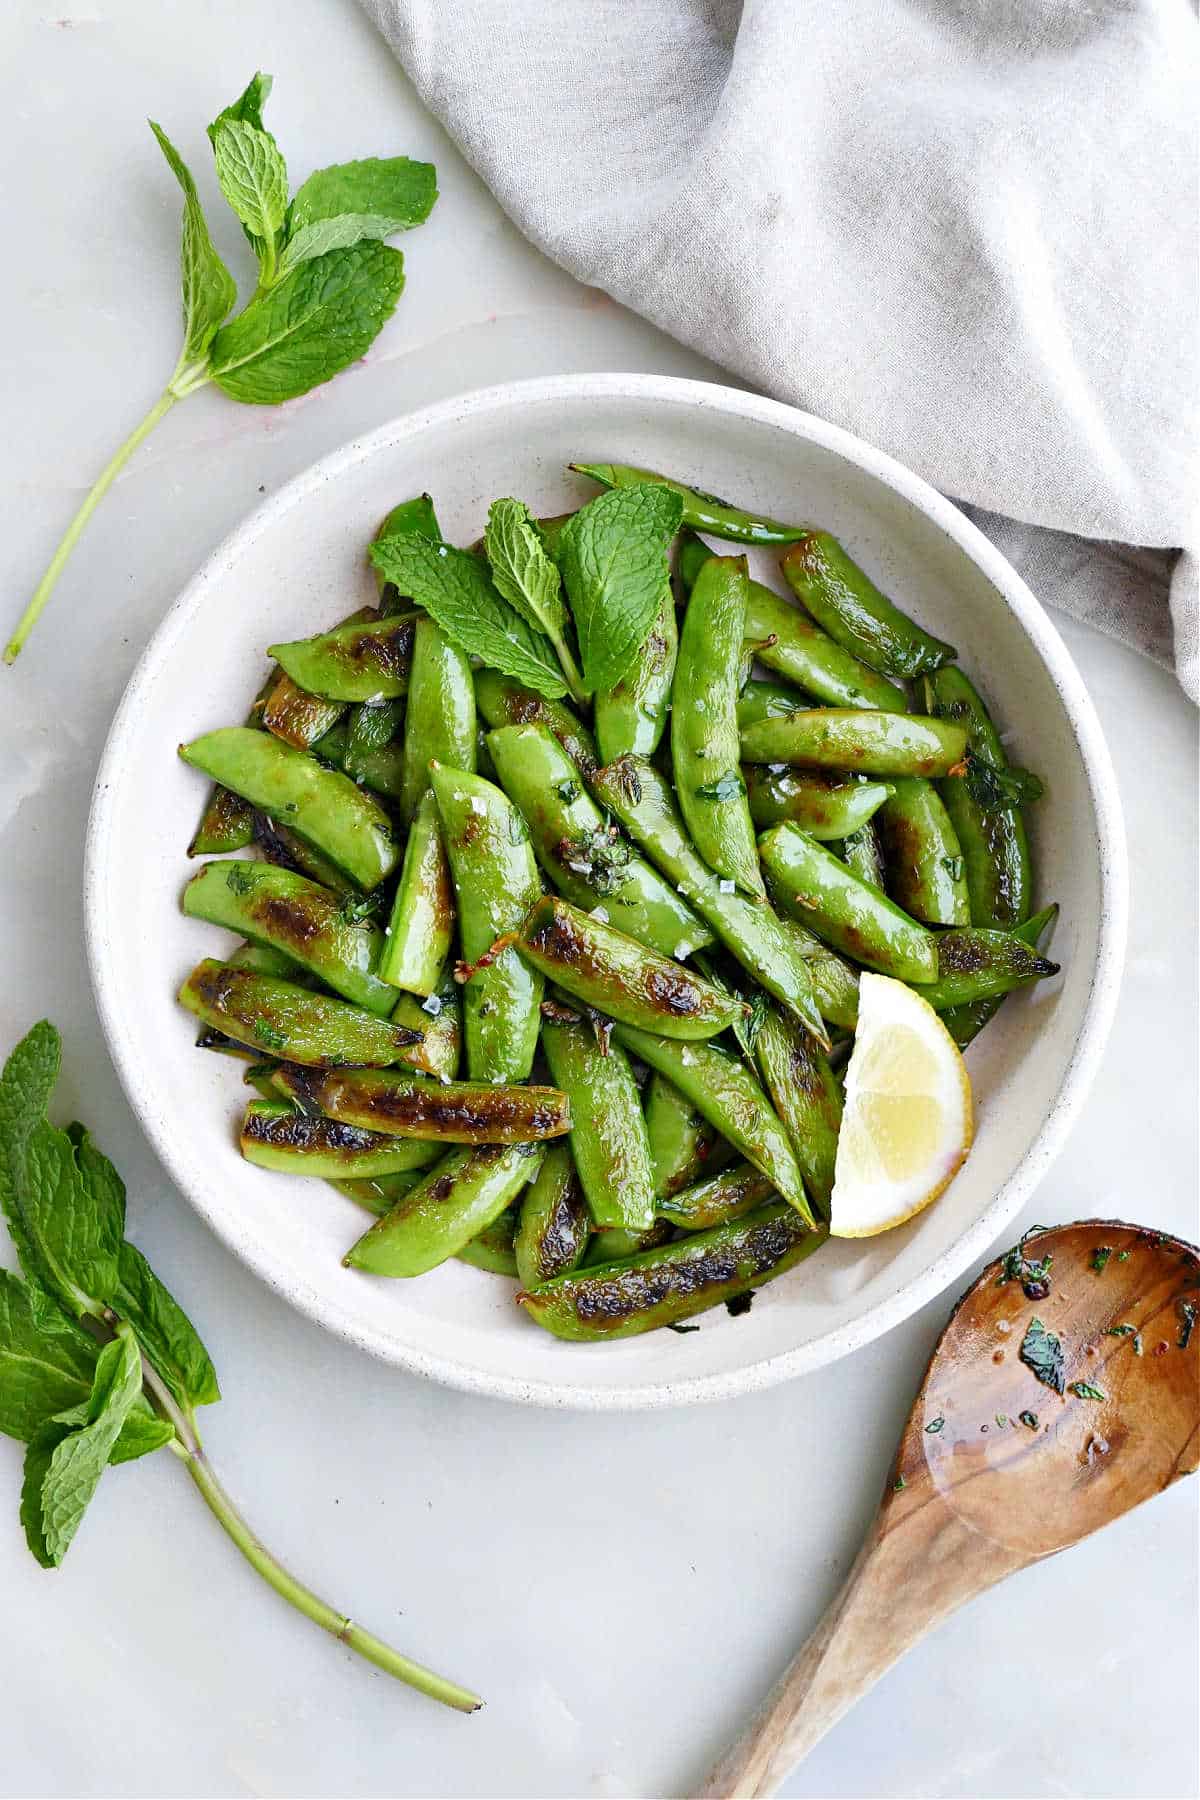 Sauteed snap peas in a large white bowl with a lemon next to garnish and a wooden spoon.